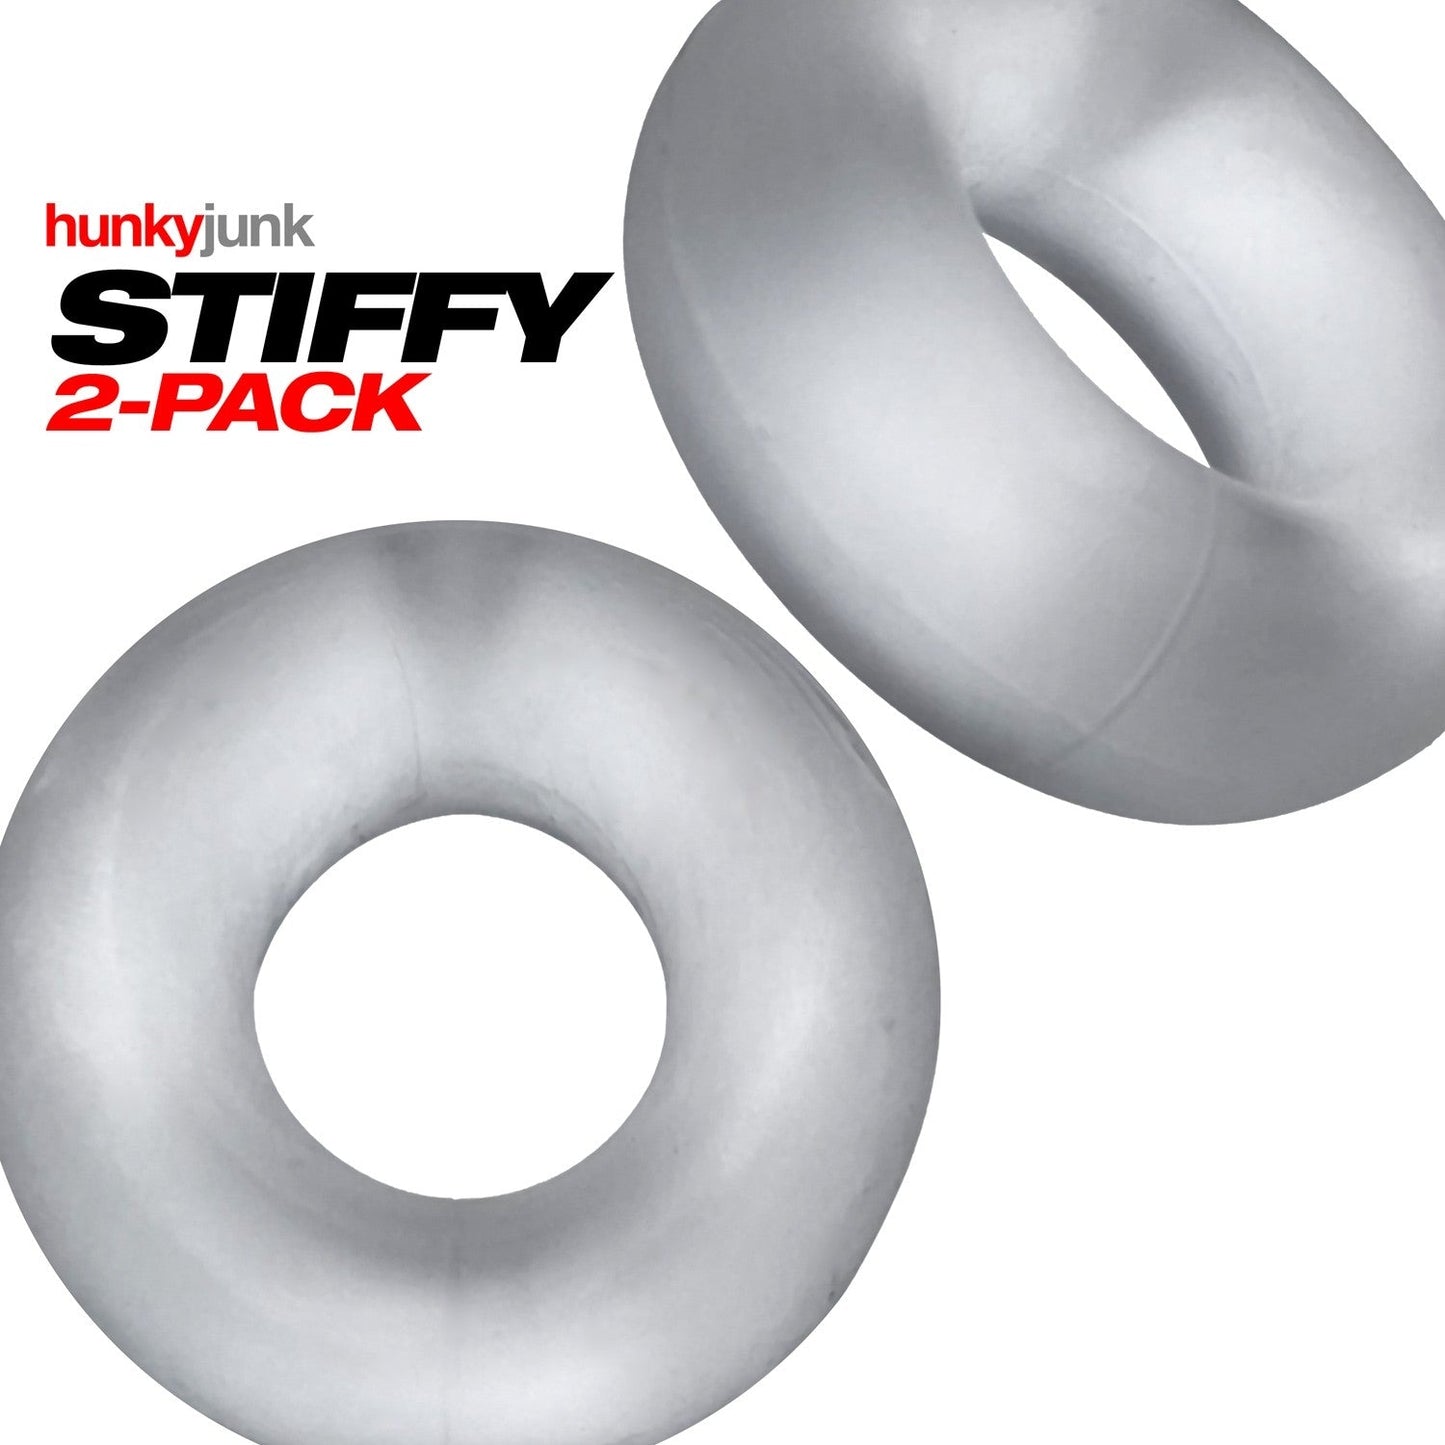 STIFFY 2-pack bulge cockrings - CLEAR ICE